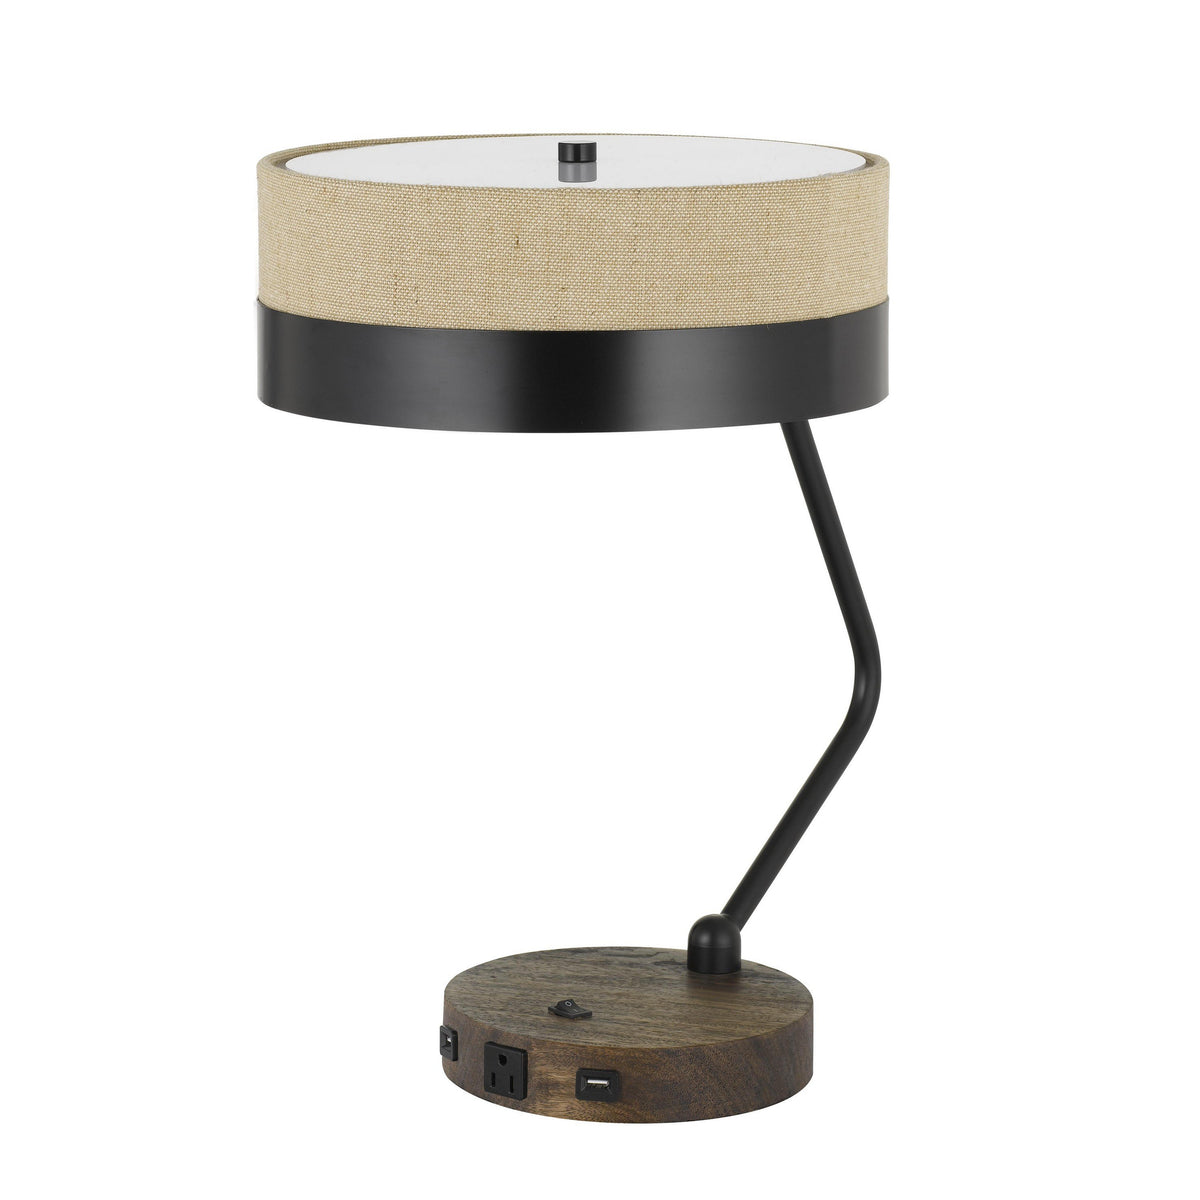 Metal Lined Fabric Shade Desk Lamp with Wooden Base, Beige and Black - BM224889